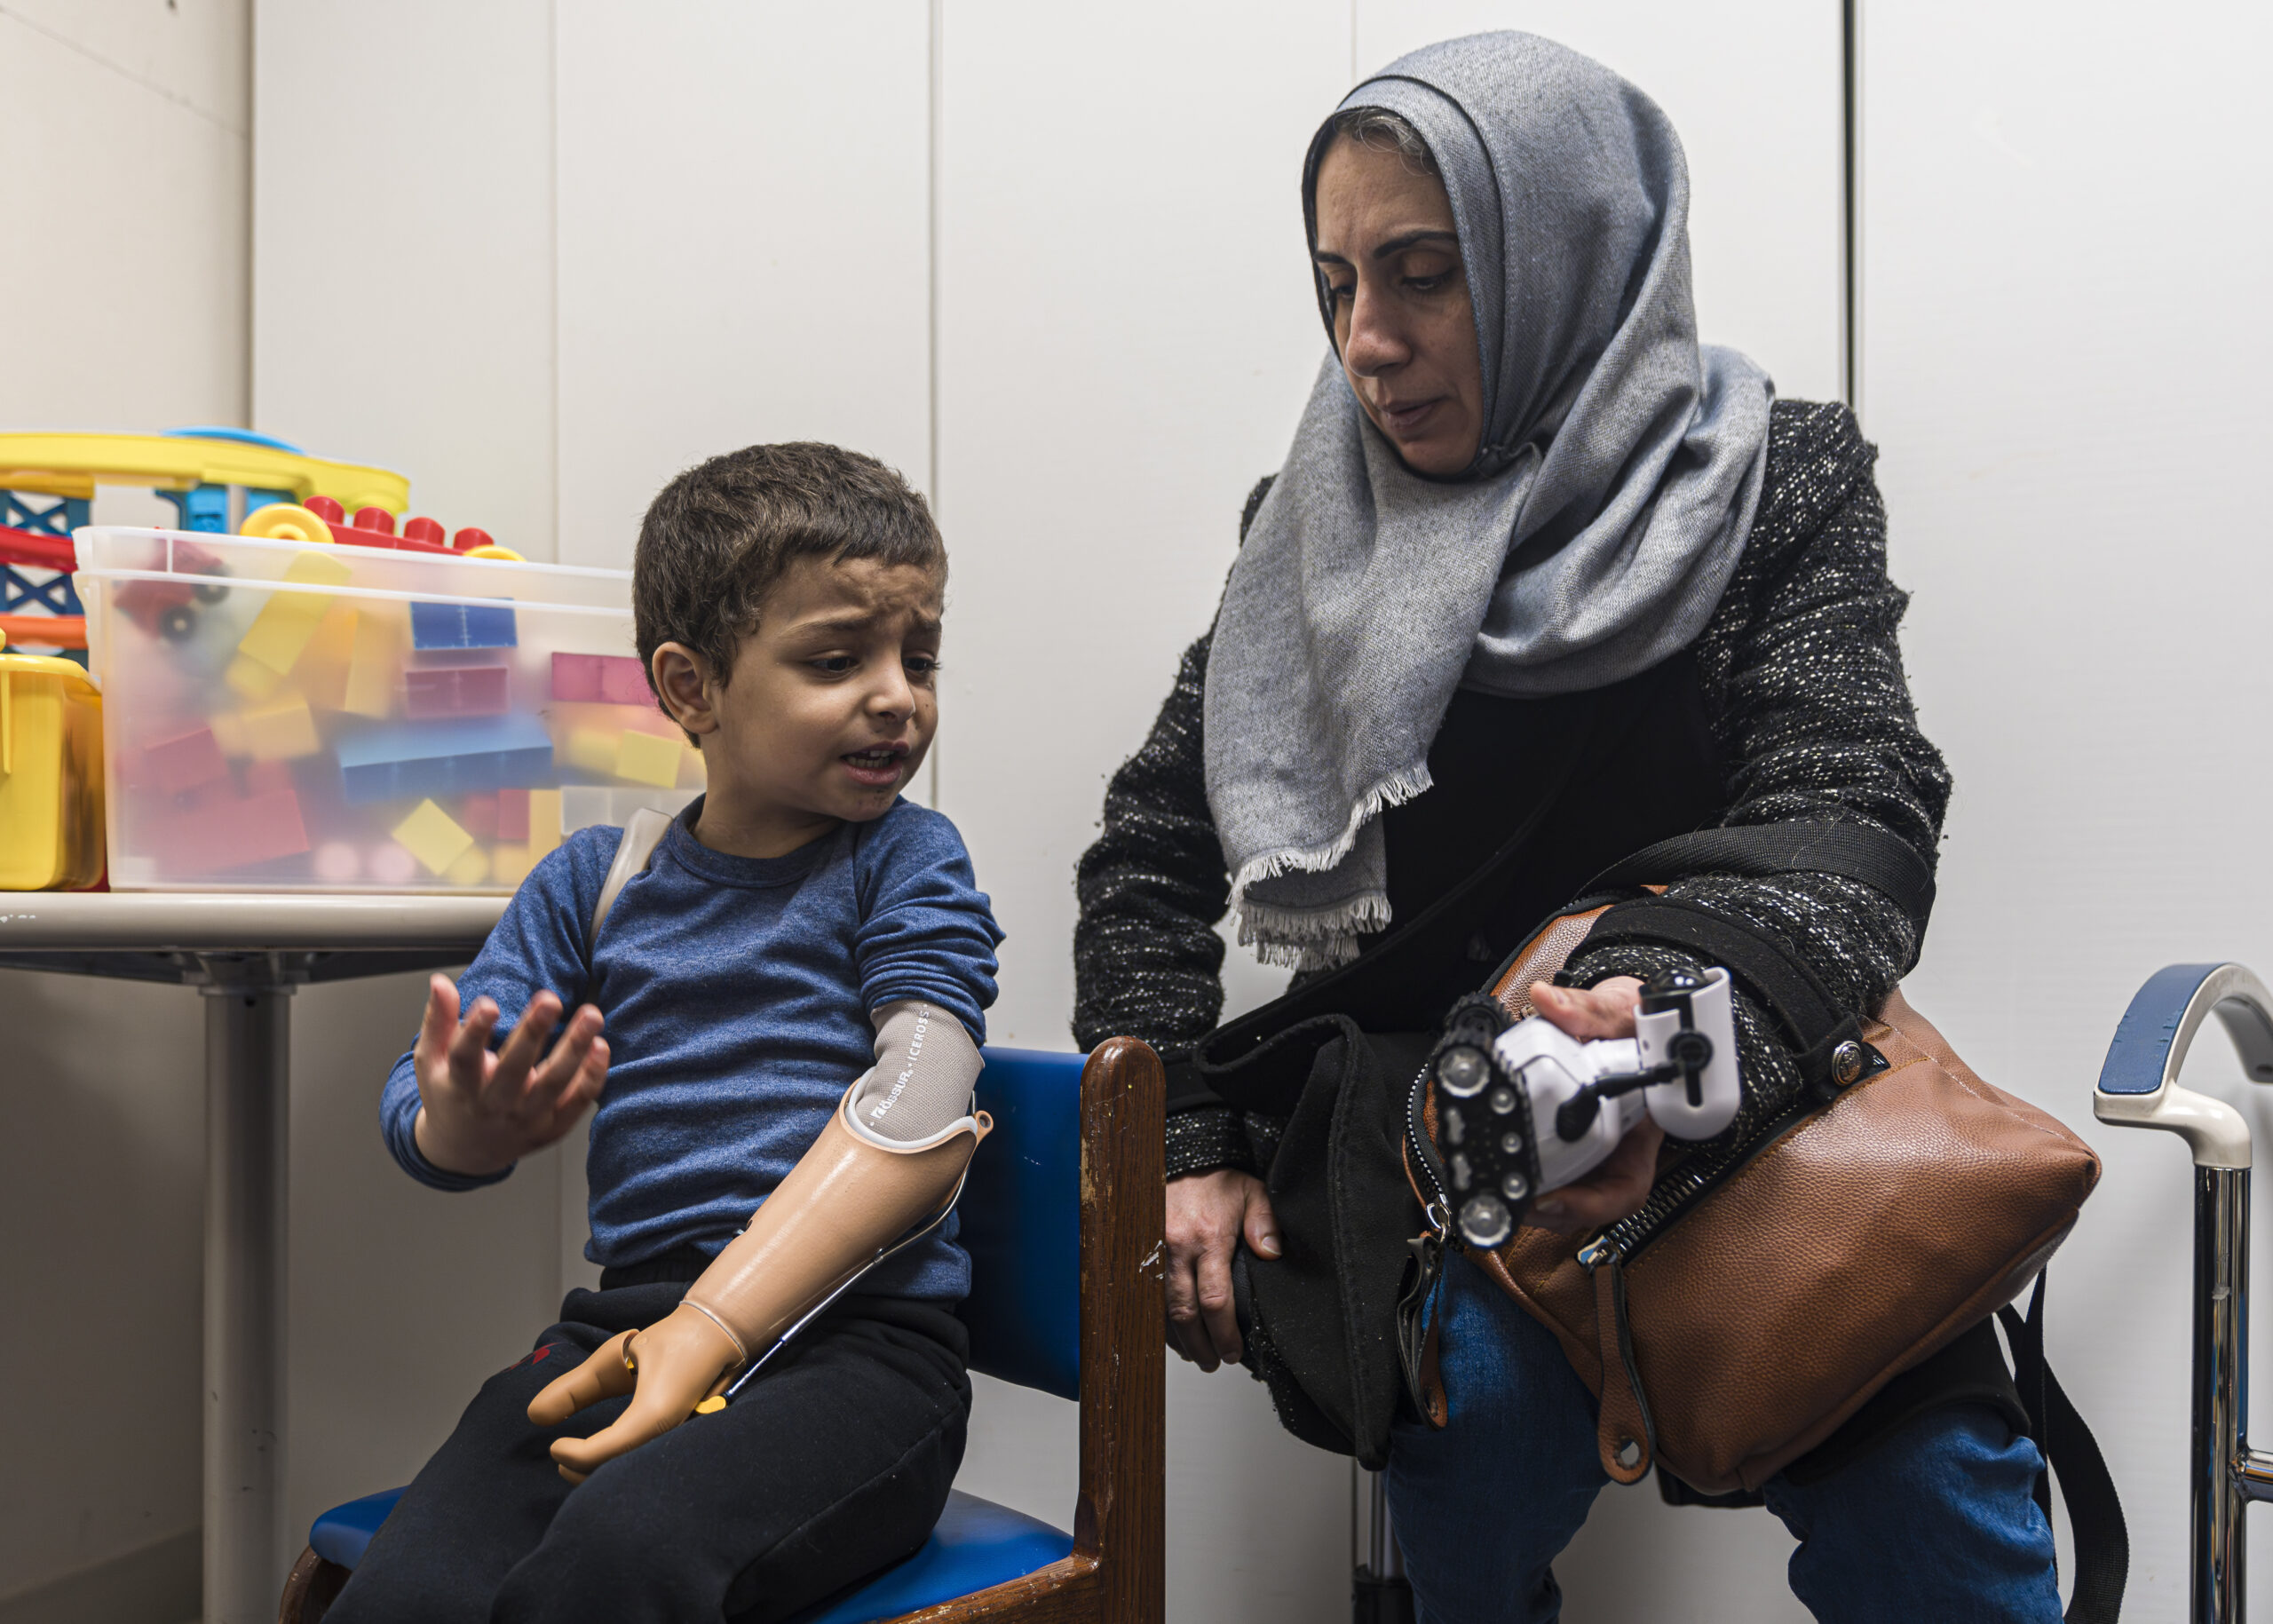 PHILADELPHIA — More stories like this will continue to emerge about Palestine as the war over Gaza continues: Four-year-old Omar Abu Kuwaik expresses frustration at using his new prosthetic arm with his aunt, Maha Abu Kuwaik, during an occupational therapy session at Shriners Children's Hospital on Wednesday, Feb. 28, 2024, in Philadelphia. Through the efforts of family and strangers, Omar was brought out of Gaza and to the United States, where he received treatment, including a prosthetic arm. He spent his days in a house run by a medical charity in New York City, accompanied by his aunt.Photo: Peter K. Afriyie/AP